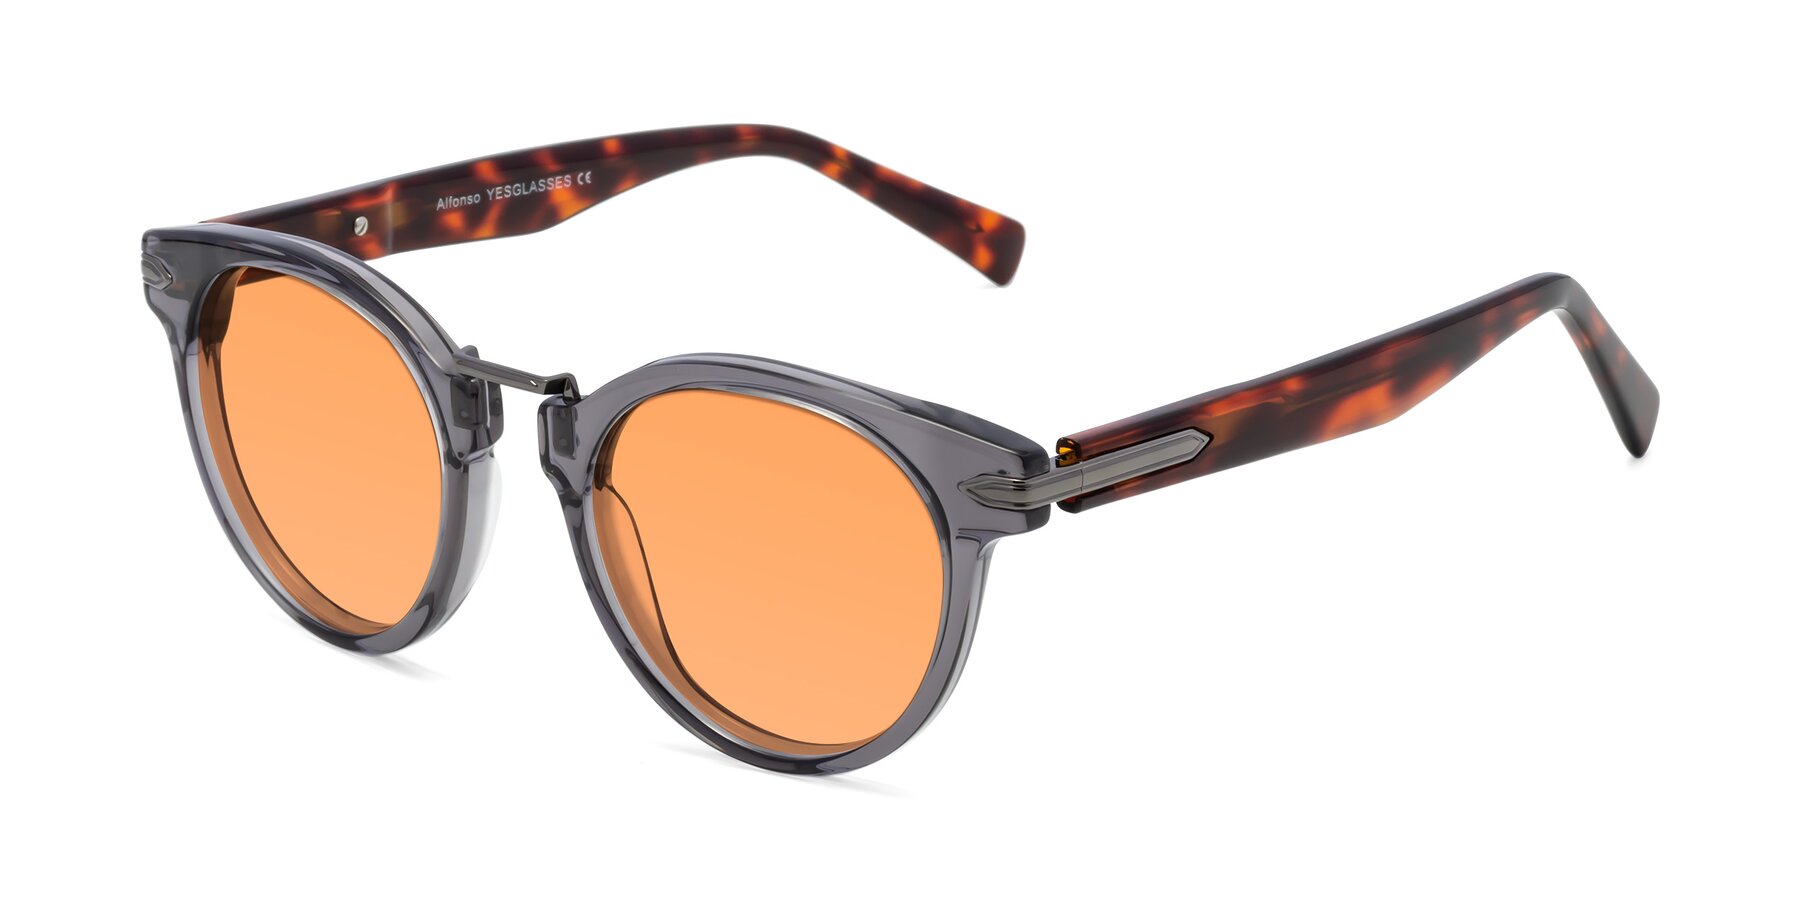 Angle of Alfonso in Gray /Tortoise with Medium Orange Tinted Lenses